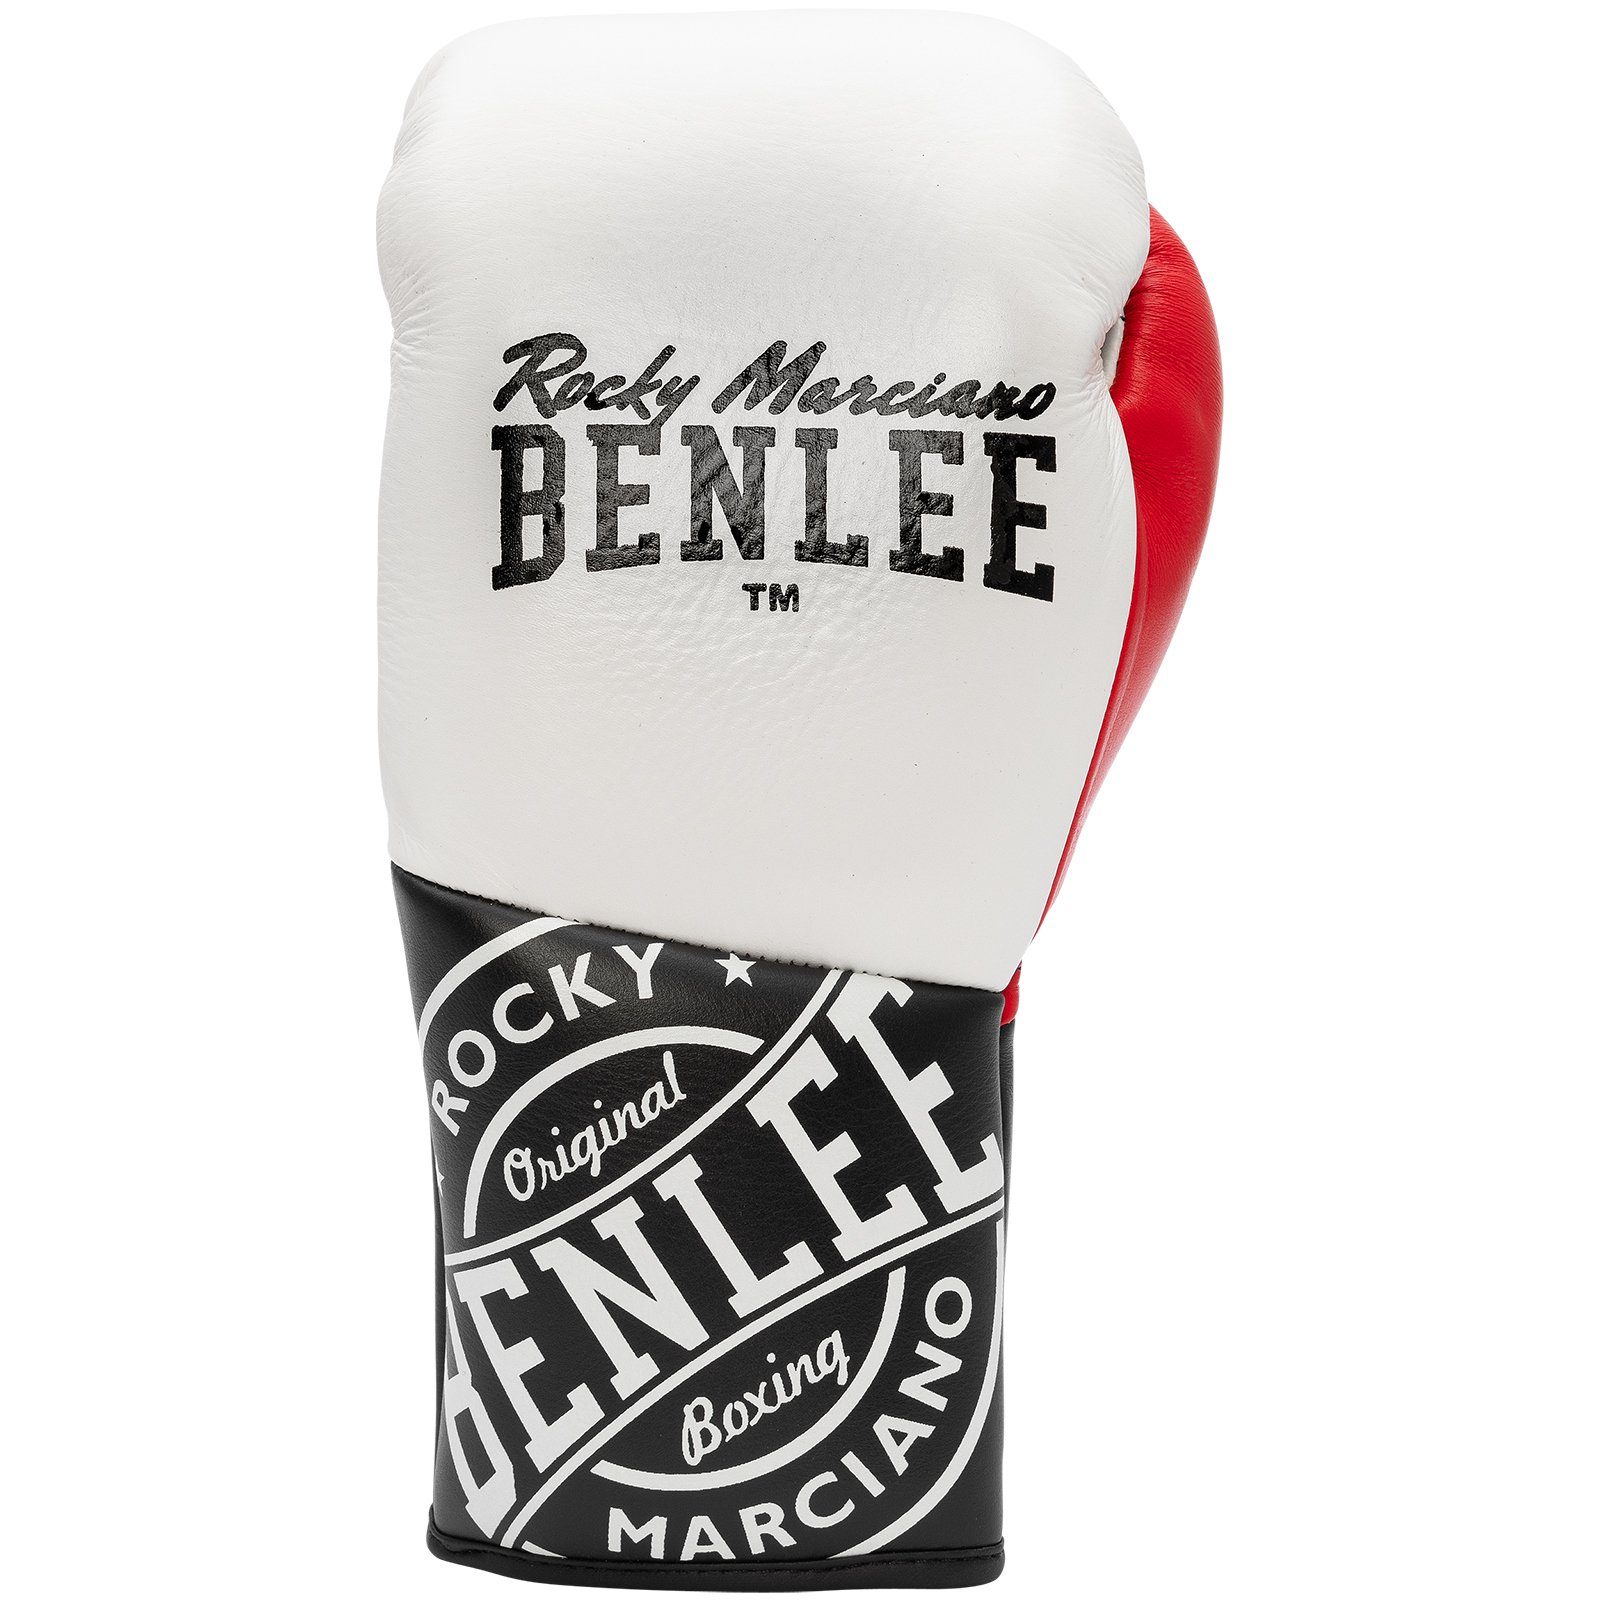 Rocky Benlee Marciano White/Black/Red Boxhandschuhe CYCLONE